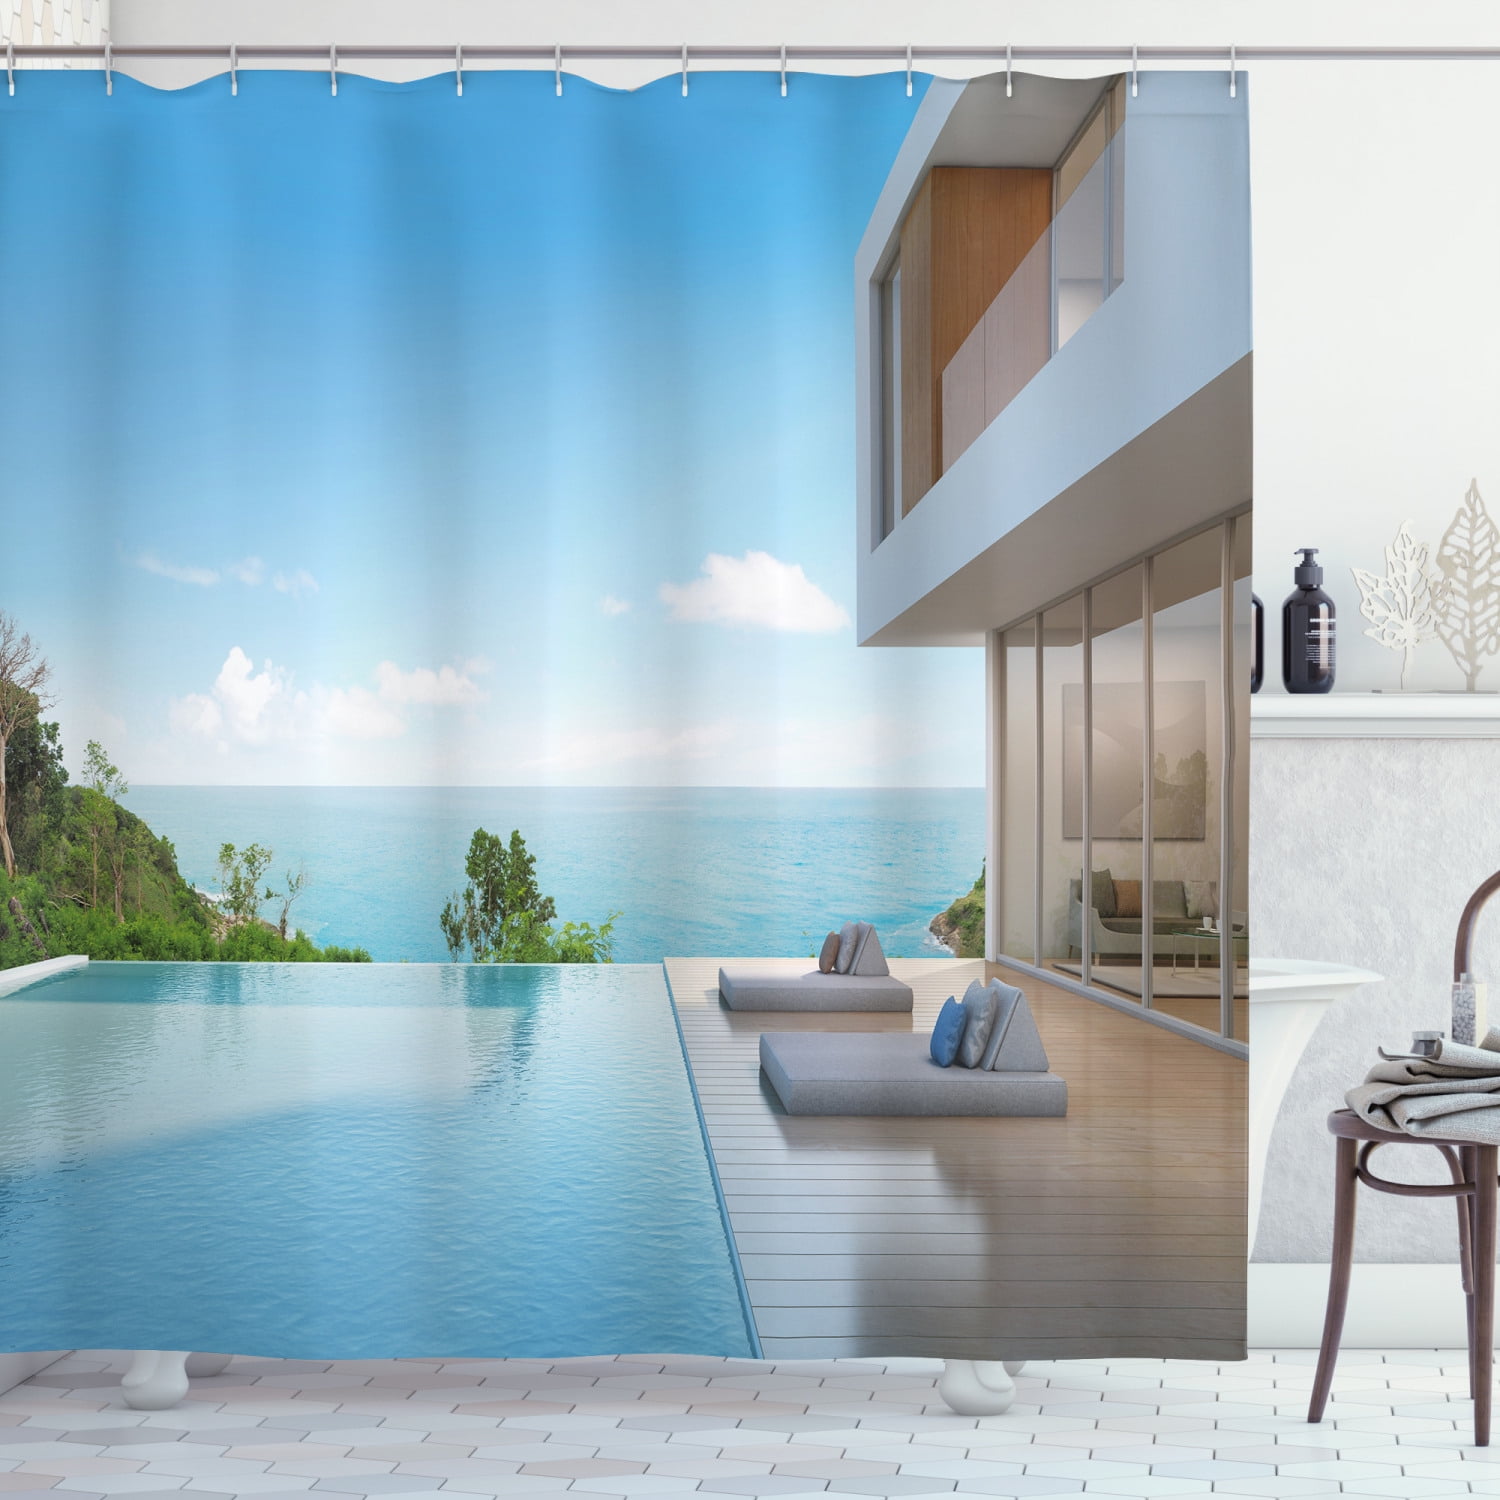 Details about   Summer Beach Waterproof Bathroom Polyester Shower Curtain Liner Water Resistant 